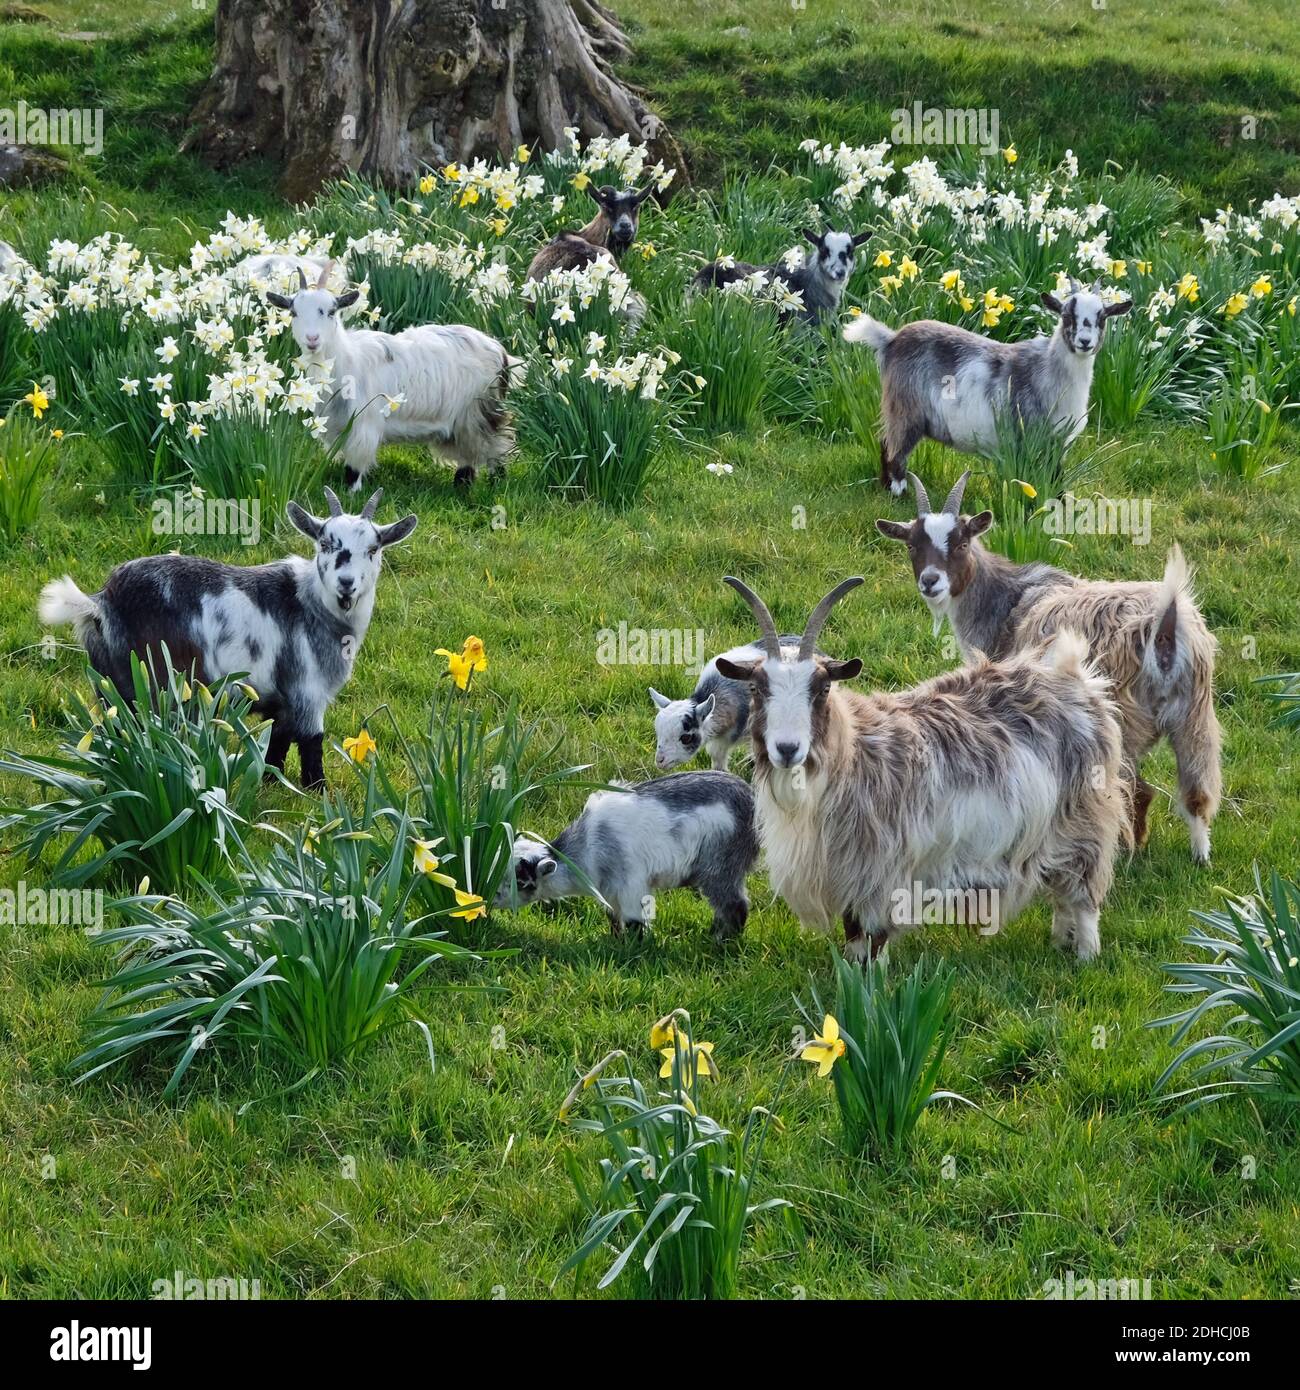 The goats that stare at men, Bridgend Road, Ballycarry, County Antrim. Stock Photo